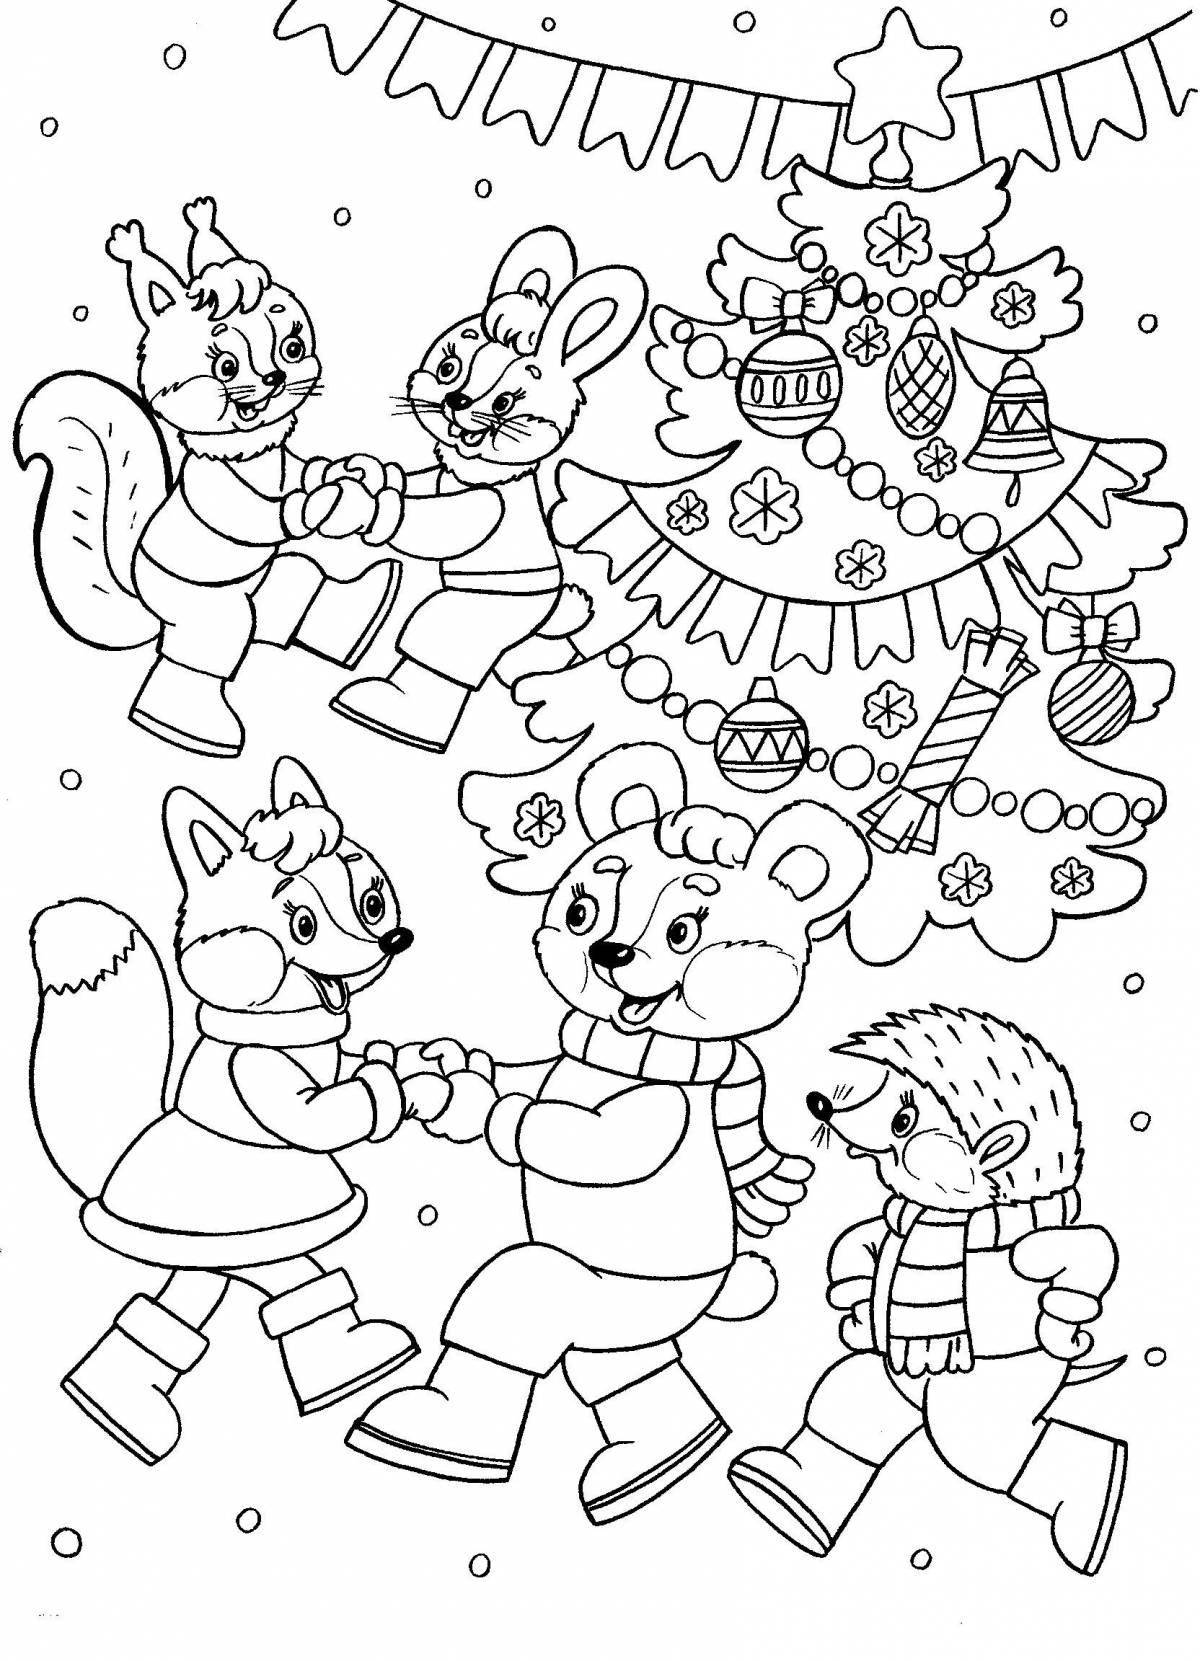 Rampant New Year's Eve coloring book